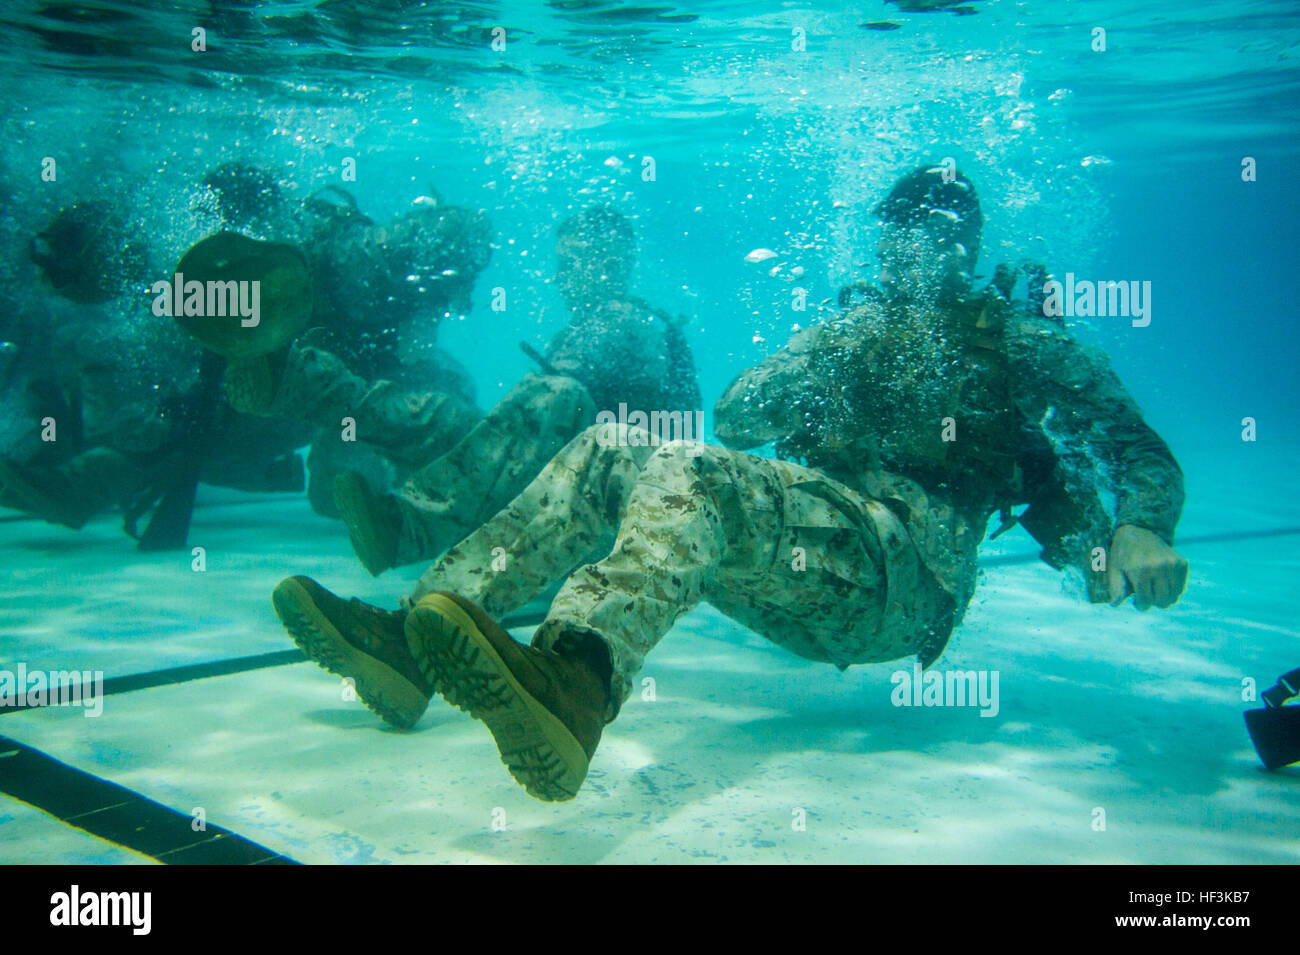 U.S. Marines with The Basic School shed their gear during their basic and intermediate swim qualification course at The Basic School, Marine Corps Base Quantico, Va., Sept. 10, 2015. The course teaches Marines water survival and tactical skills. (U.S. Marine Corps photo by Lance Cpl. Jacqueline A. Garcia/Released) The Basic School Golf Co Swim Qual 150910-M-PO745-205 Stock Photo